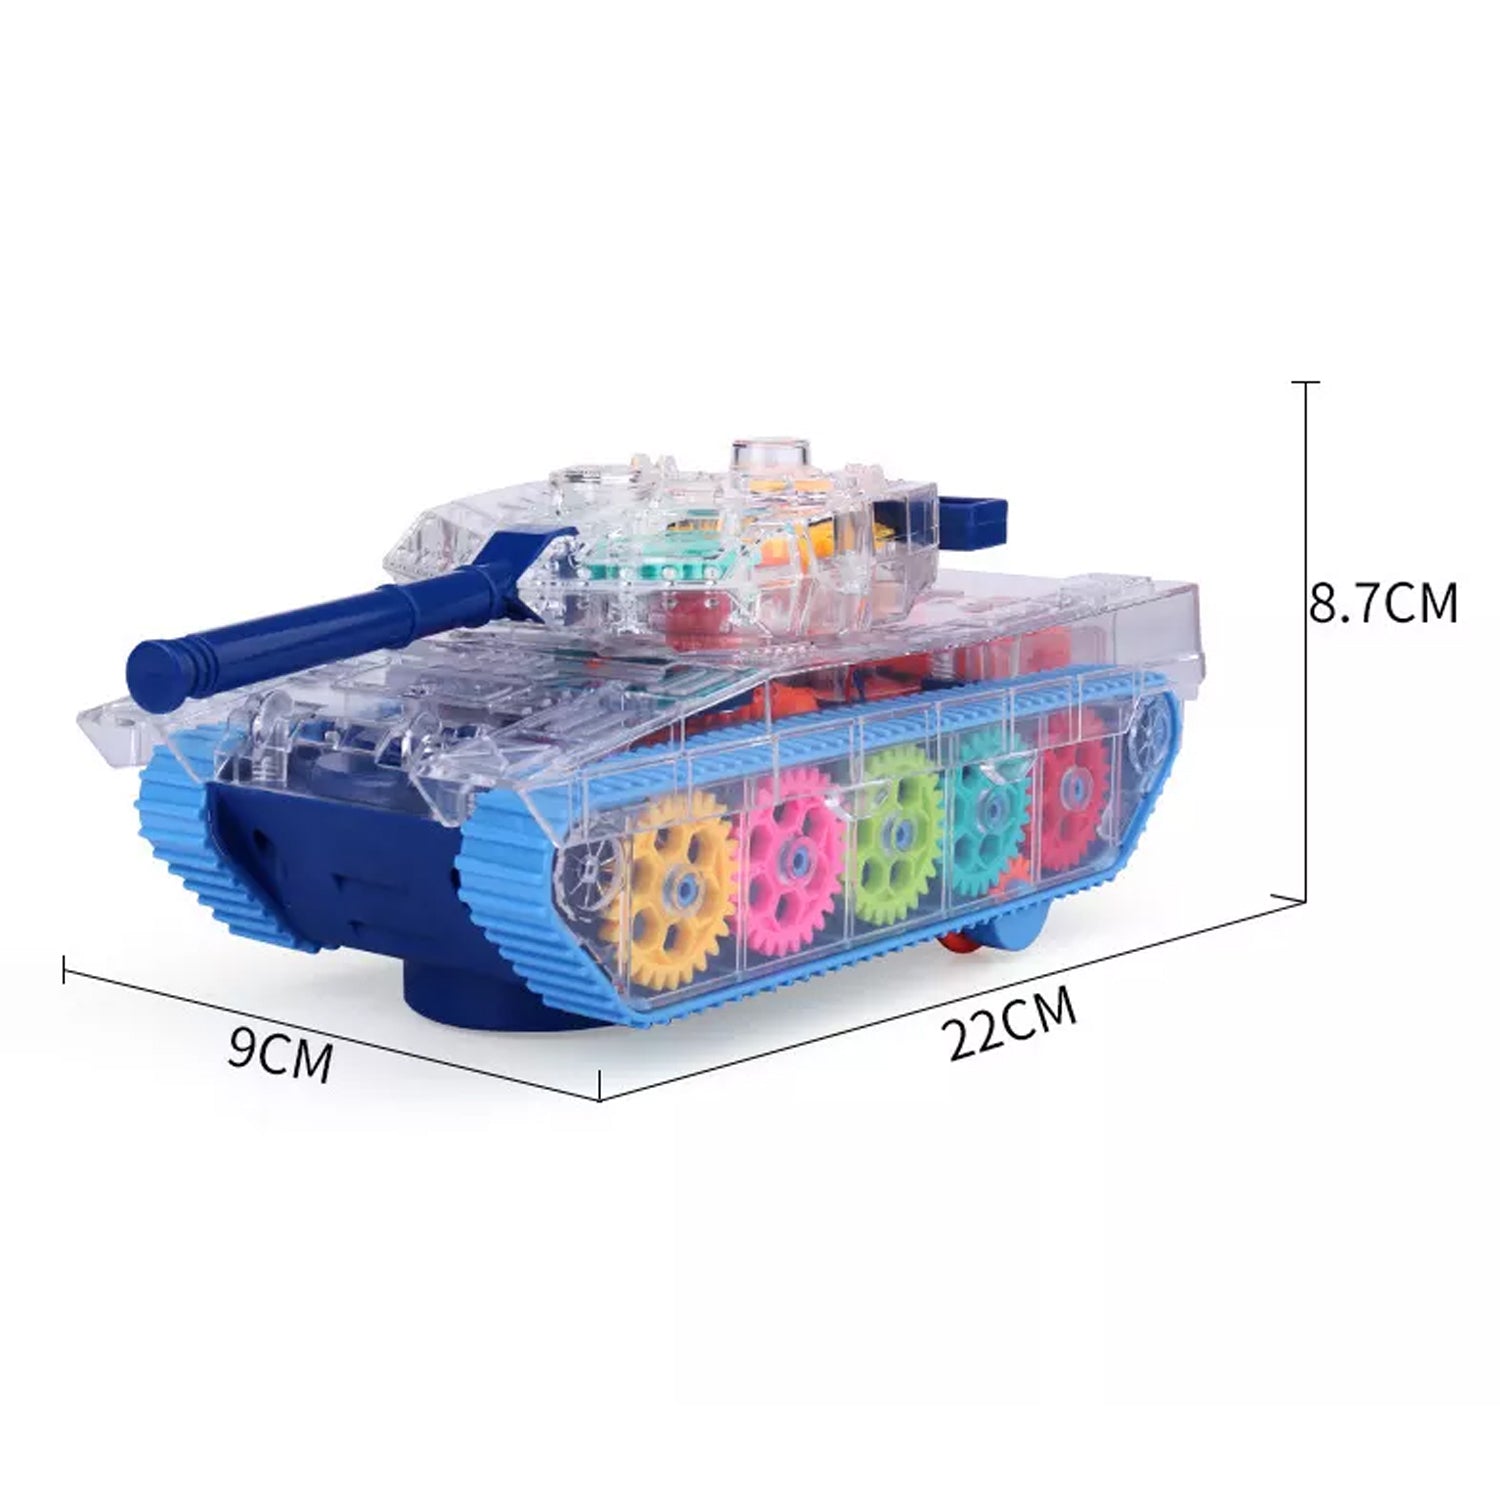 Musical Gear Tank Toy - The Perfect Toy Tanks for Kids